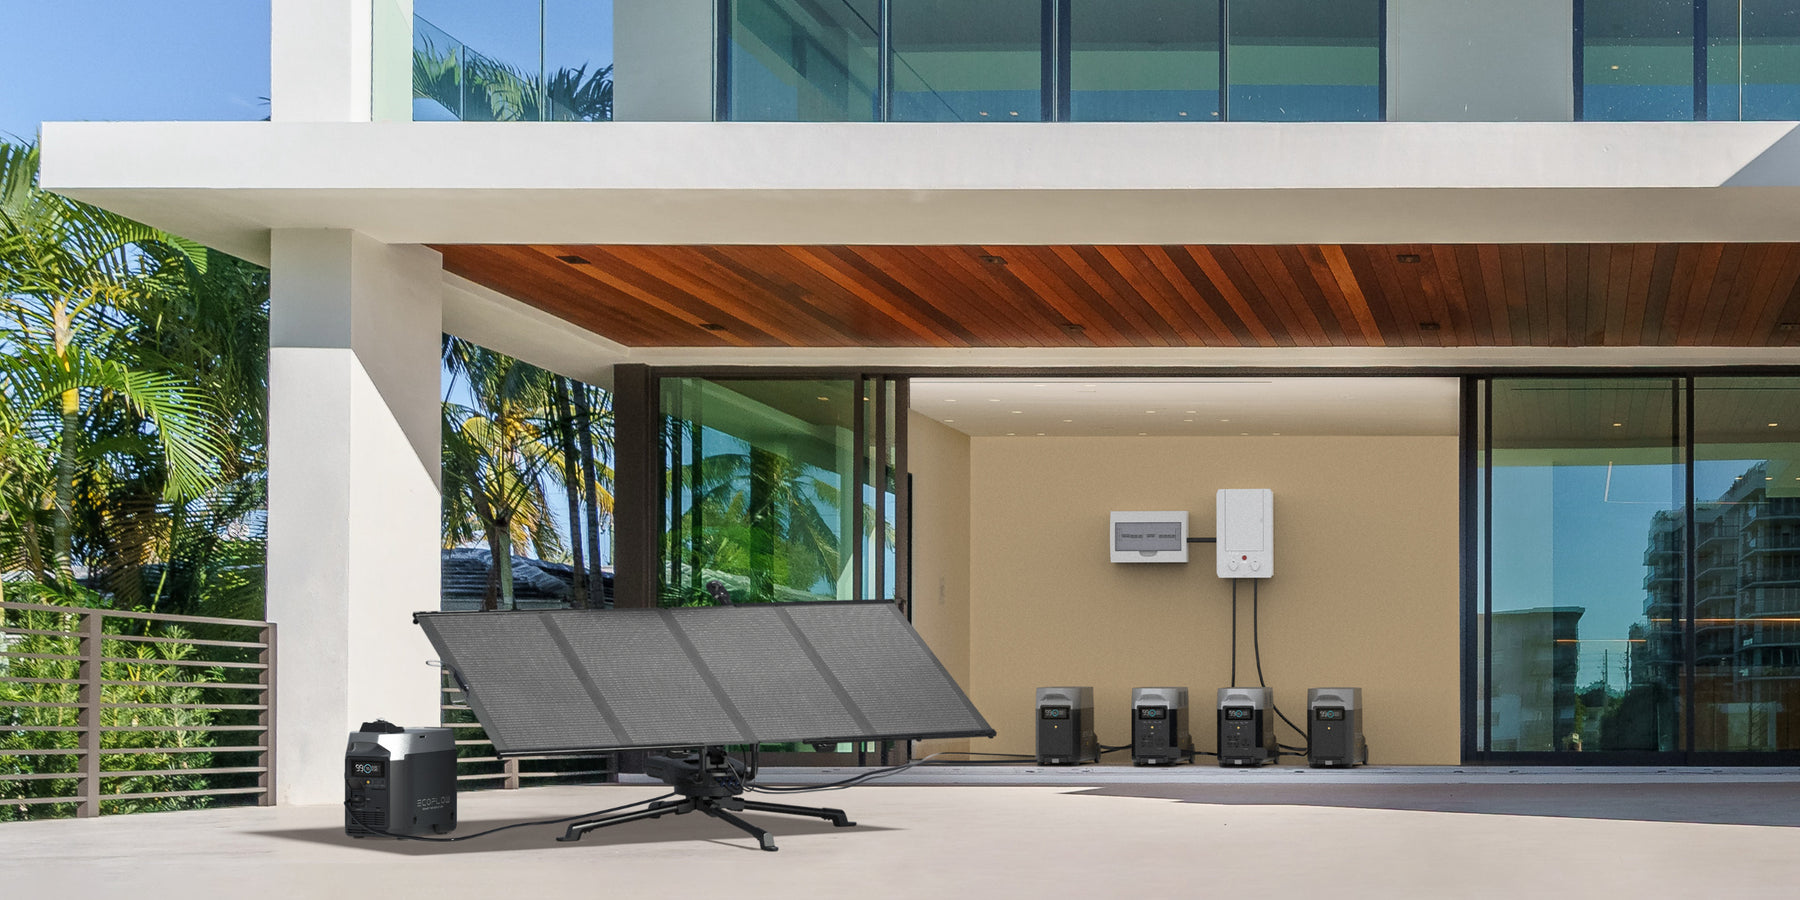 The world’s first portable home battery ecosystem.